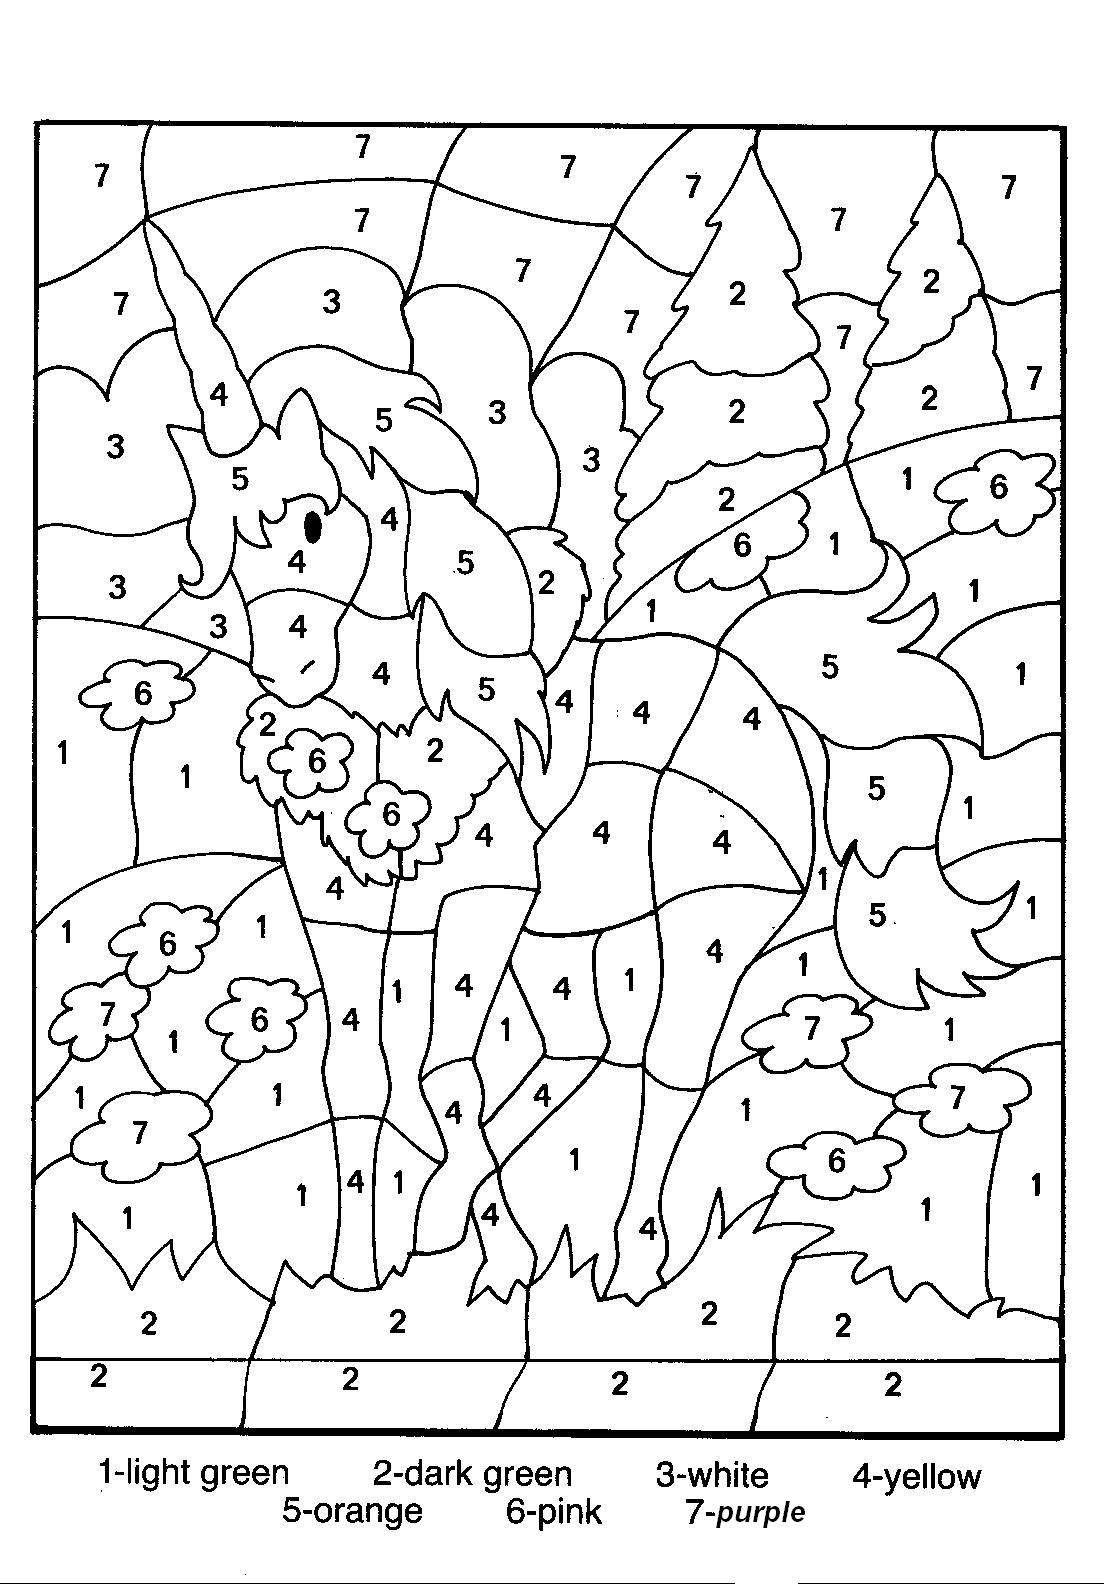 Free Printable Colornumber Coloring Pages | Colornumber - Free Printable Color By Number For Adults